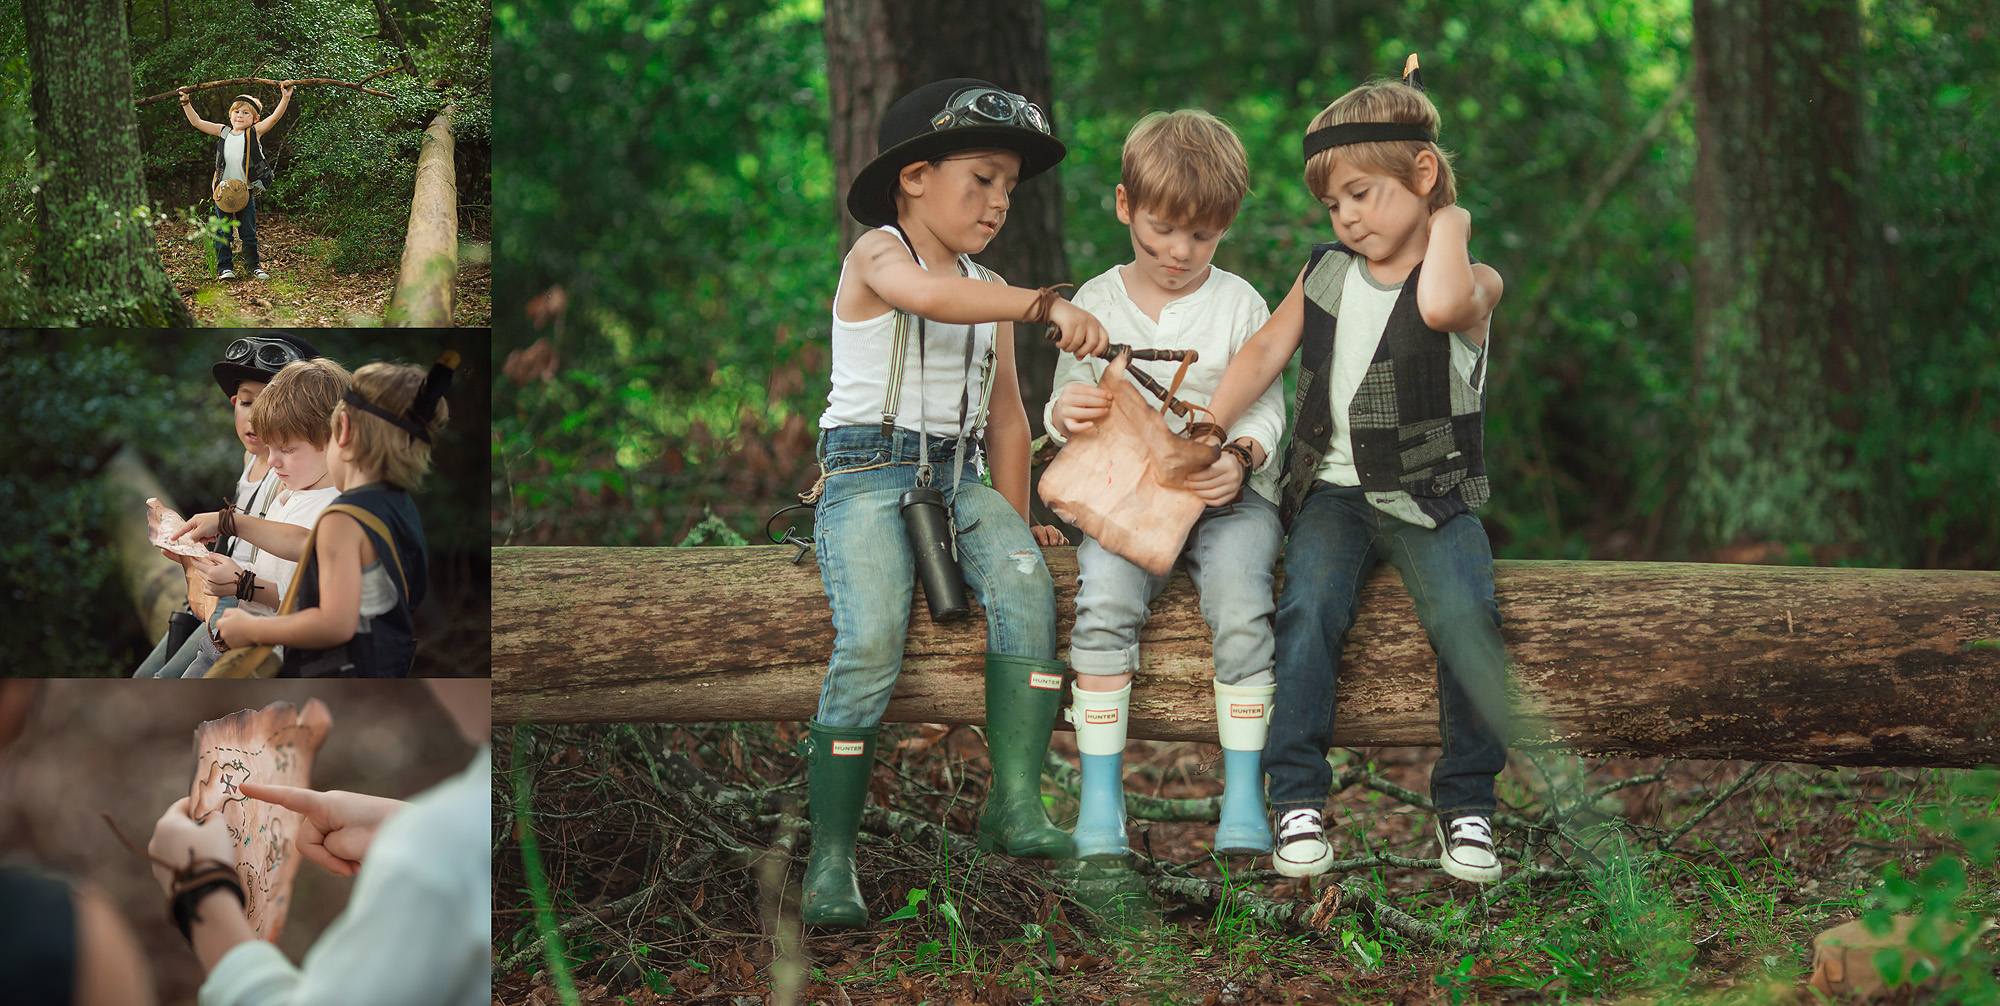 texas child photographer lost boys tribal photo session